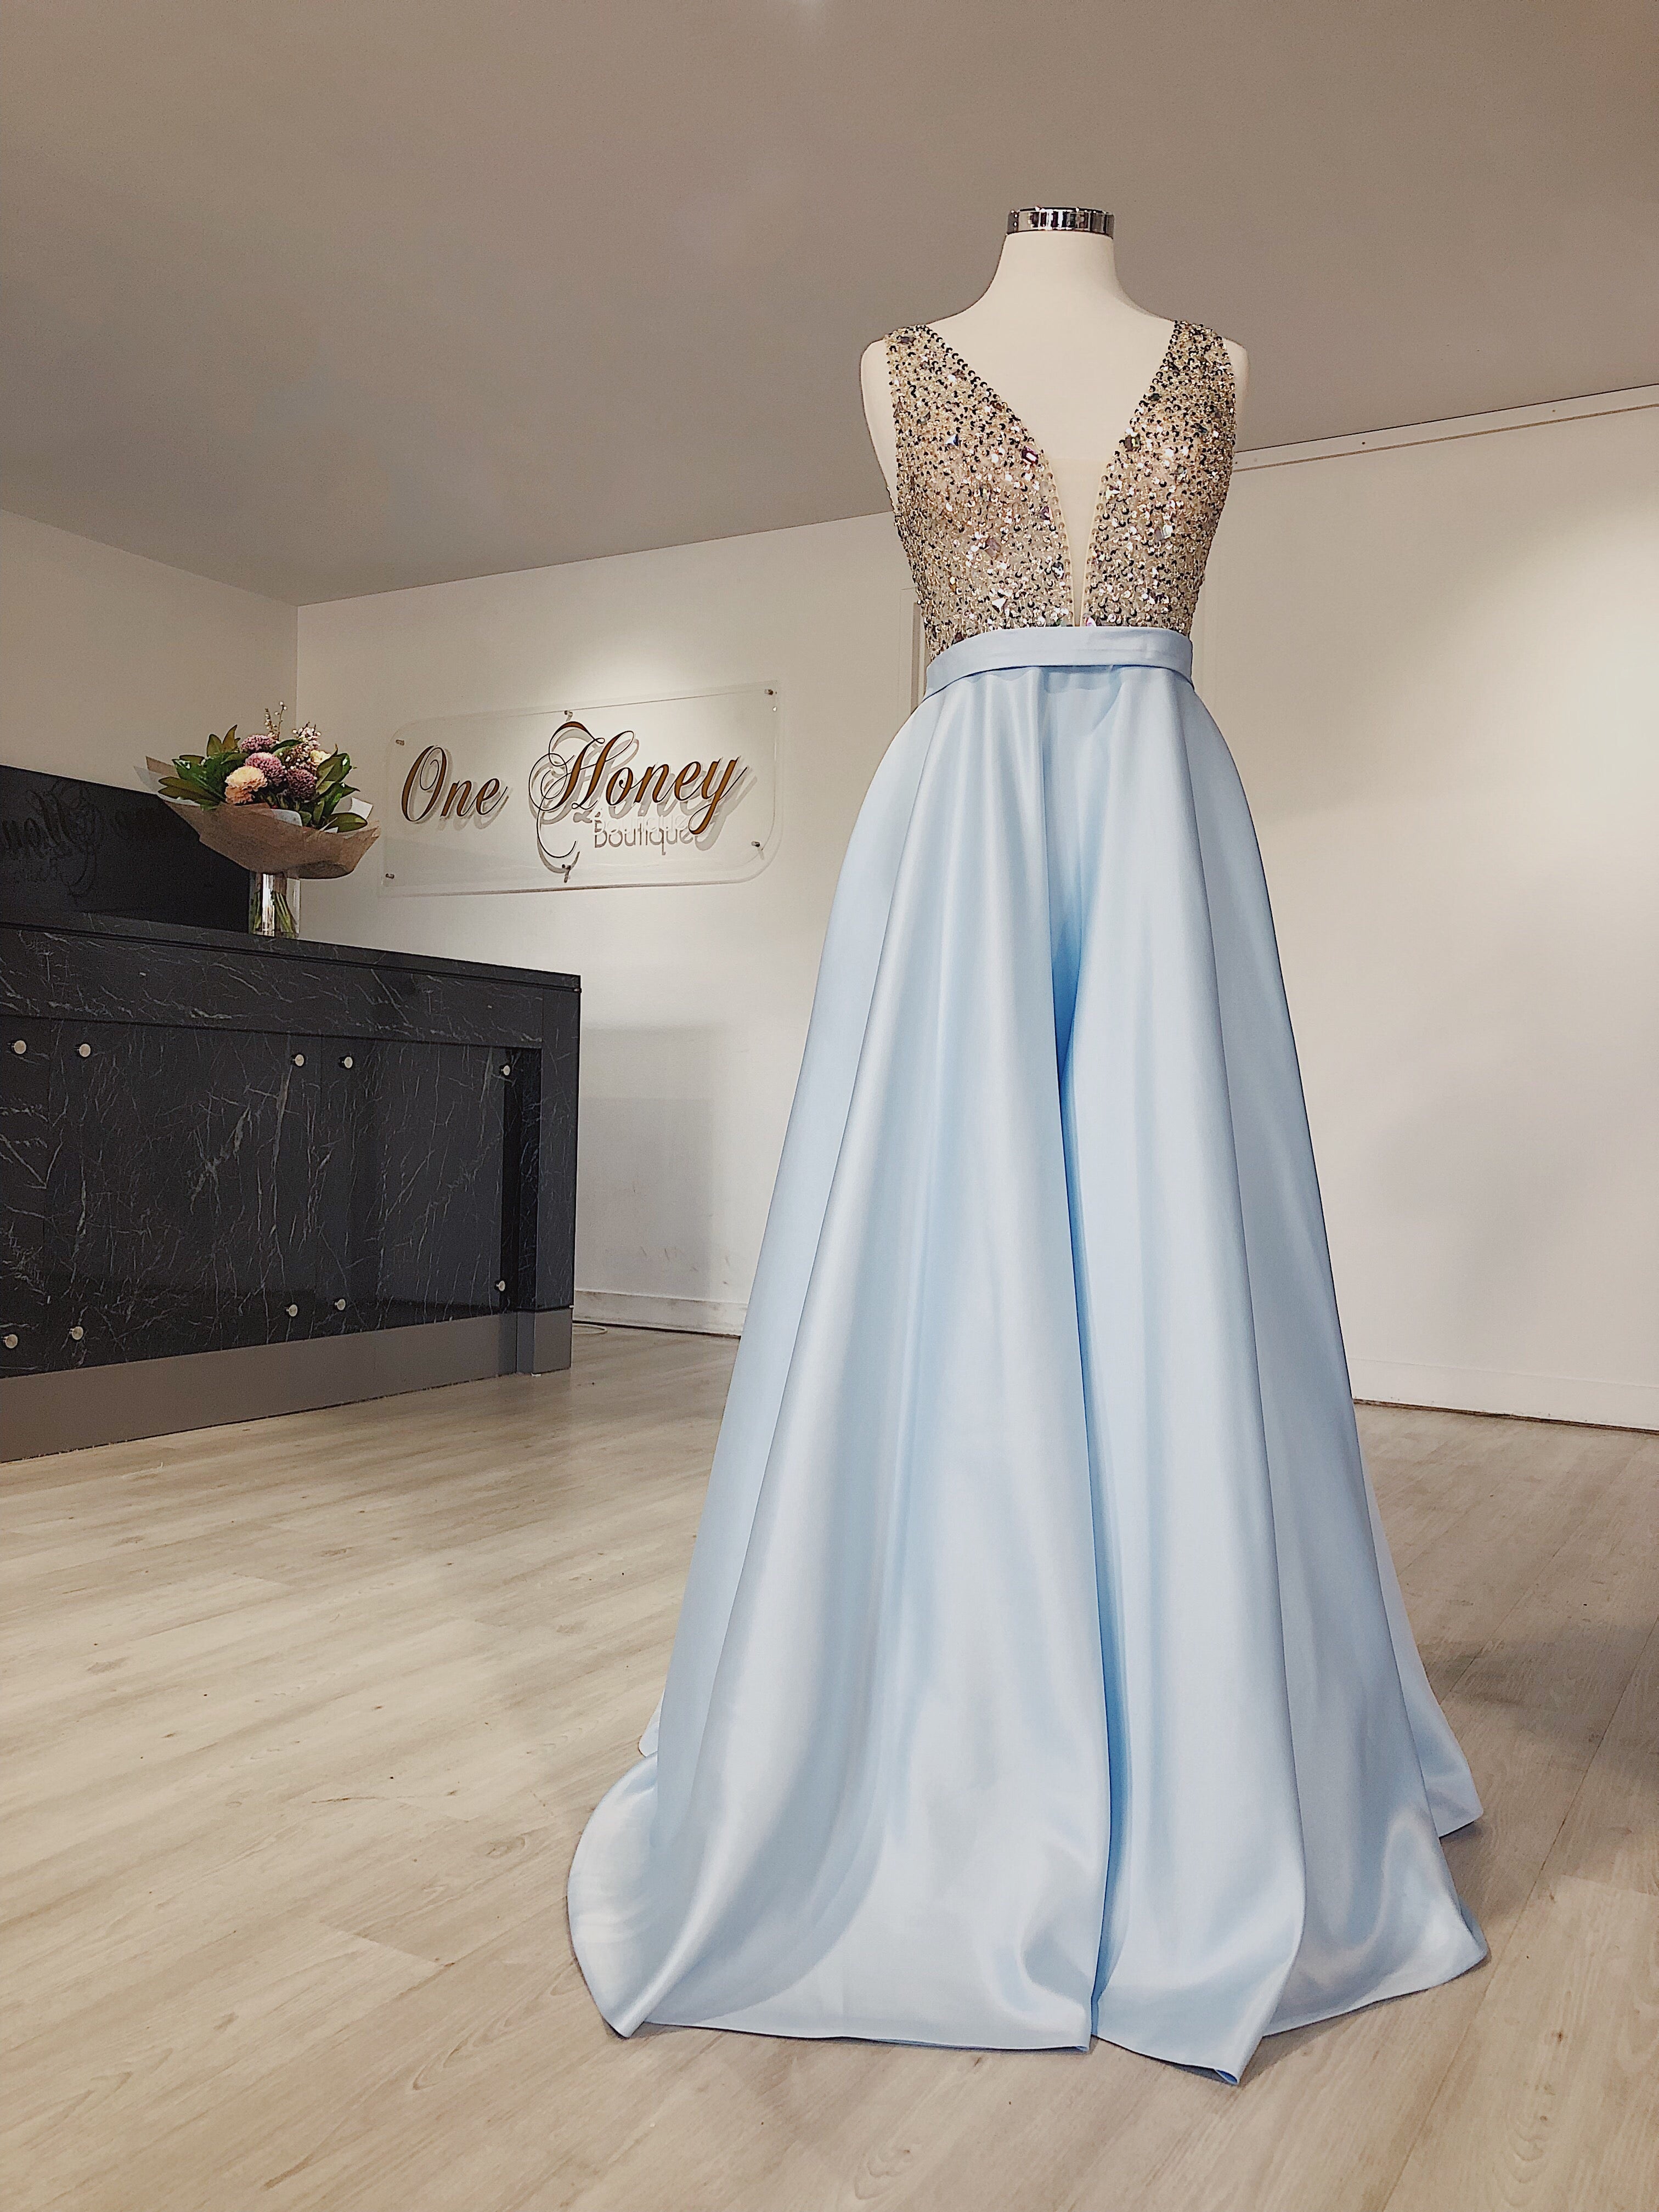 Honey Couture BROYN Silver Diamante Front Princess Ball Formal Gown Dress Honey Couture Custom$ AfterPay Humm ZipPay LayBuy Sezzle